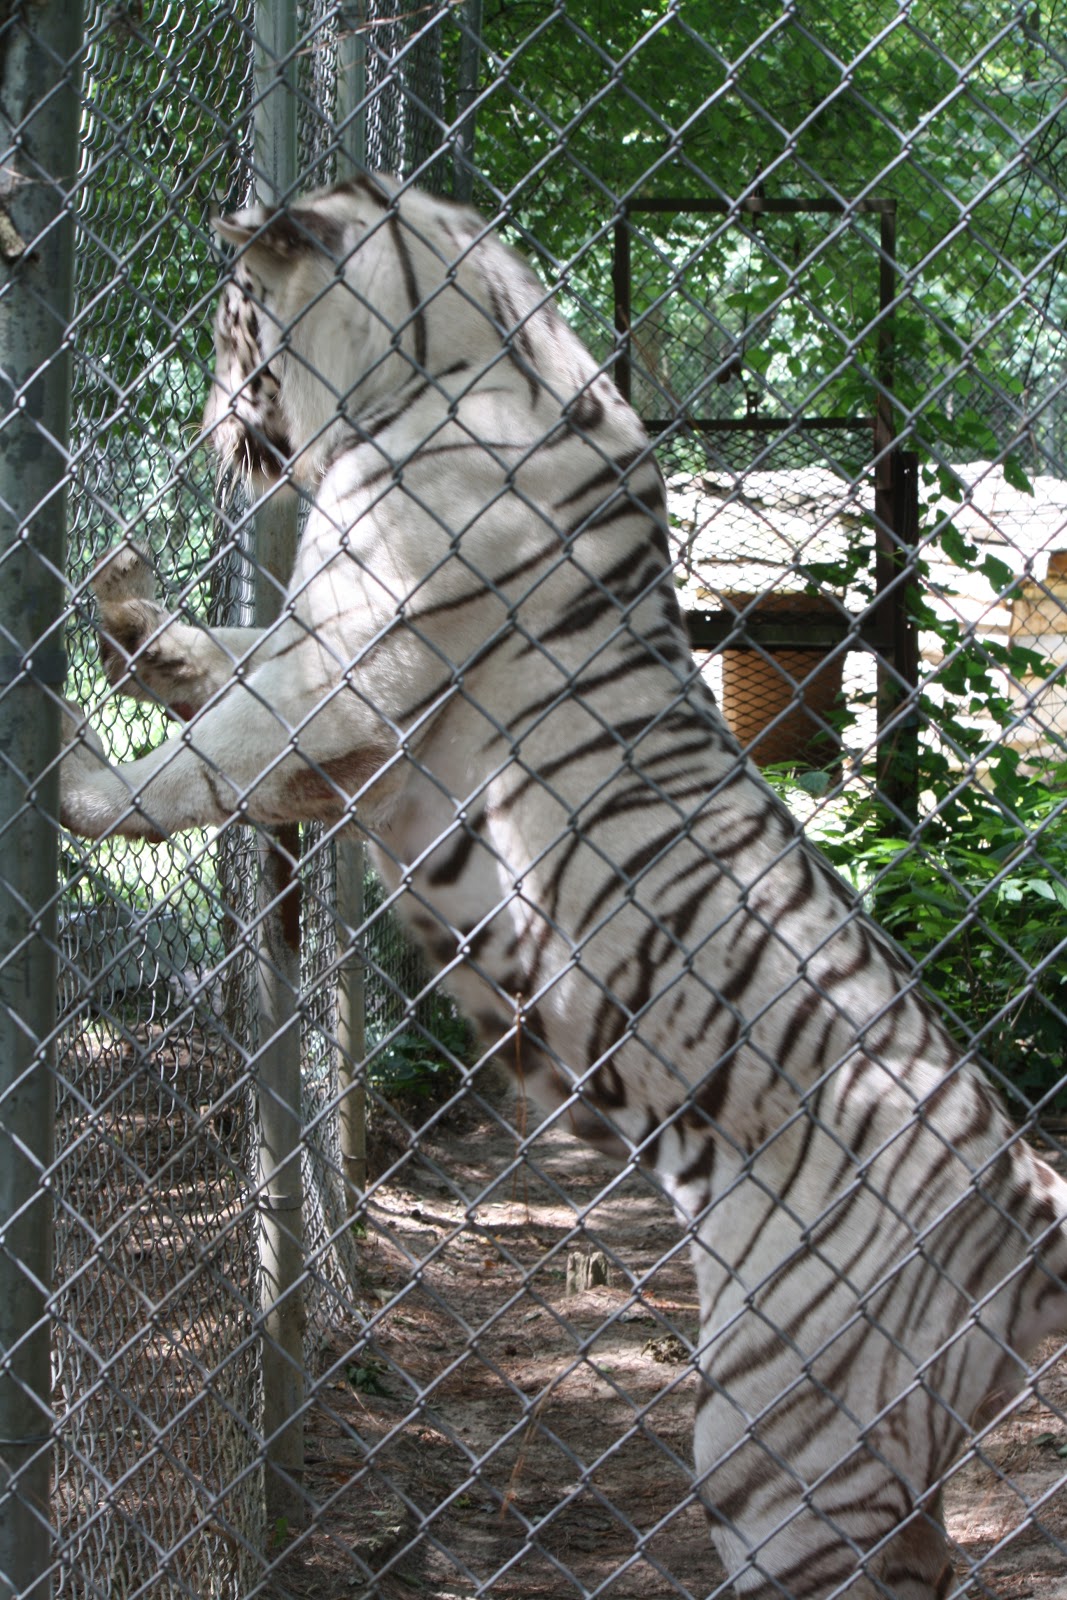 friends to Carolina Tiger Rescue , which is located in Pittsboro NC ...